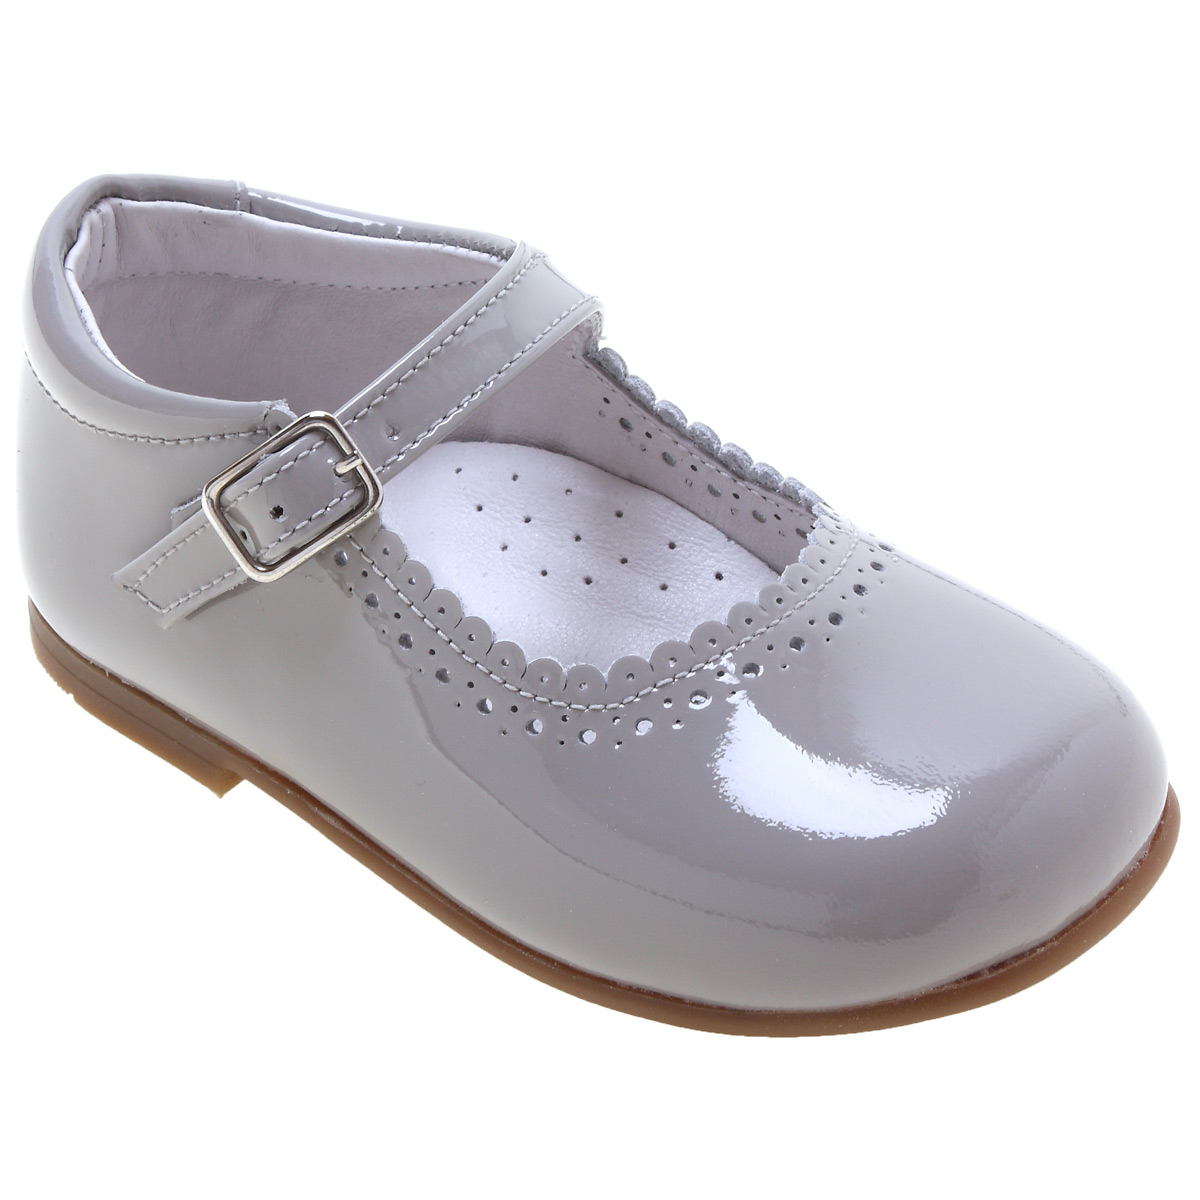 patent baby girl shoes